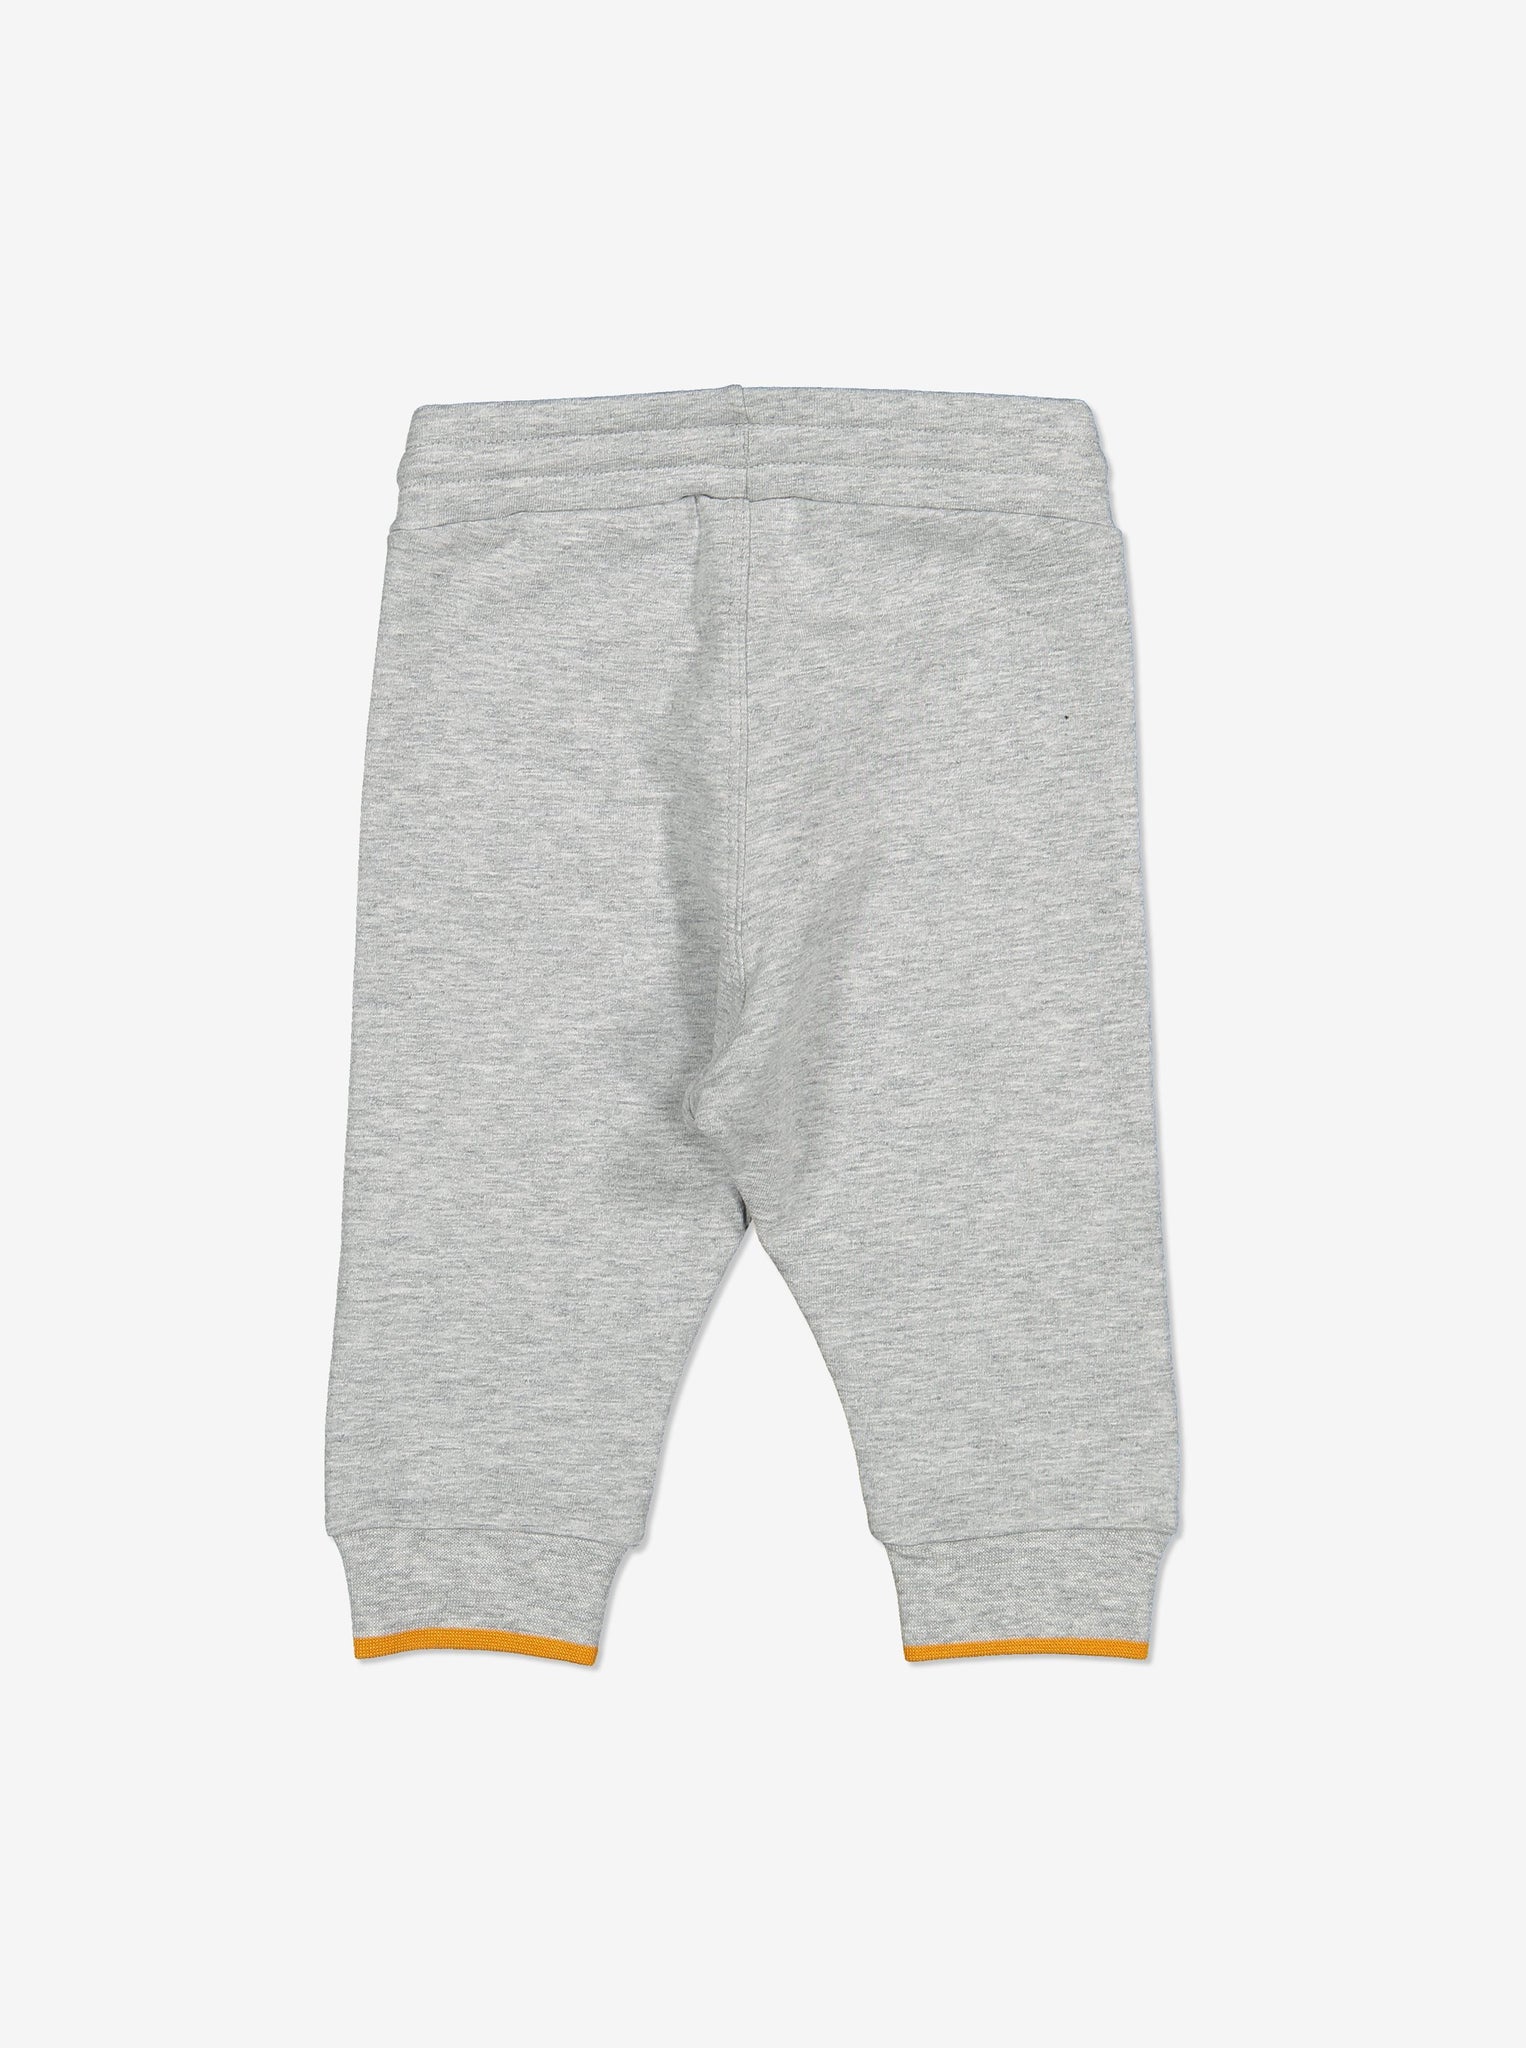 Pear Knee Patch Baby Trousers-Unisex-0-1y-Grey